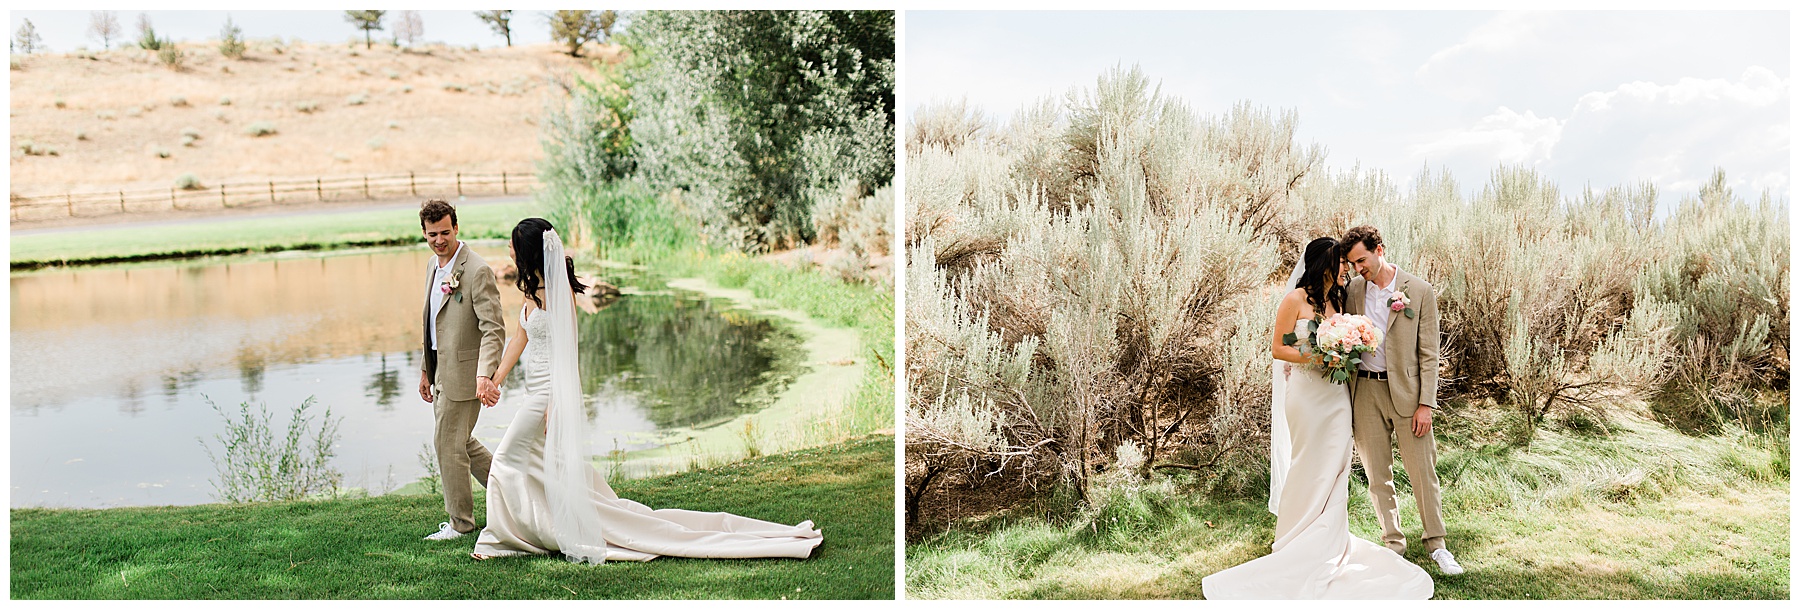 The bride and groom stroll through past a pond and green grasses for portraits at the Brasada Ranch Bend Oregon Resort